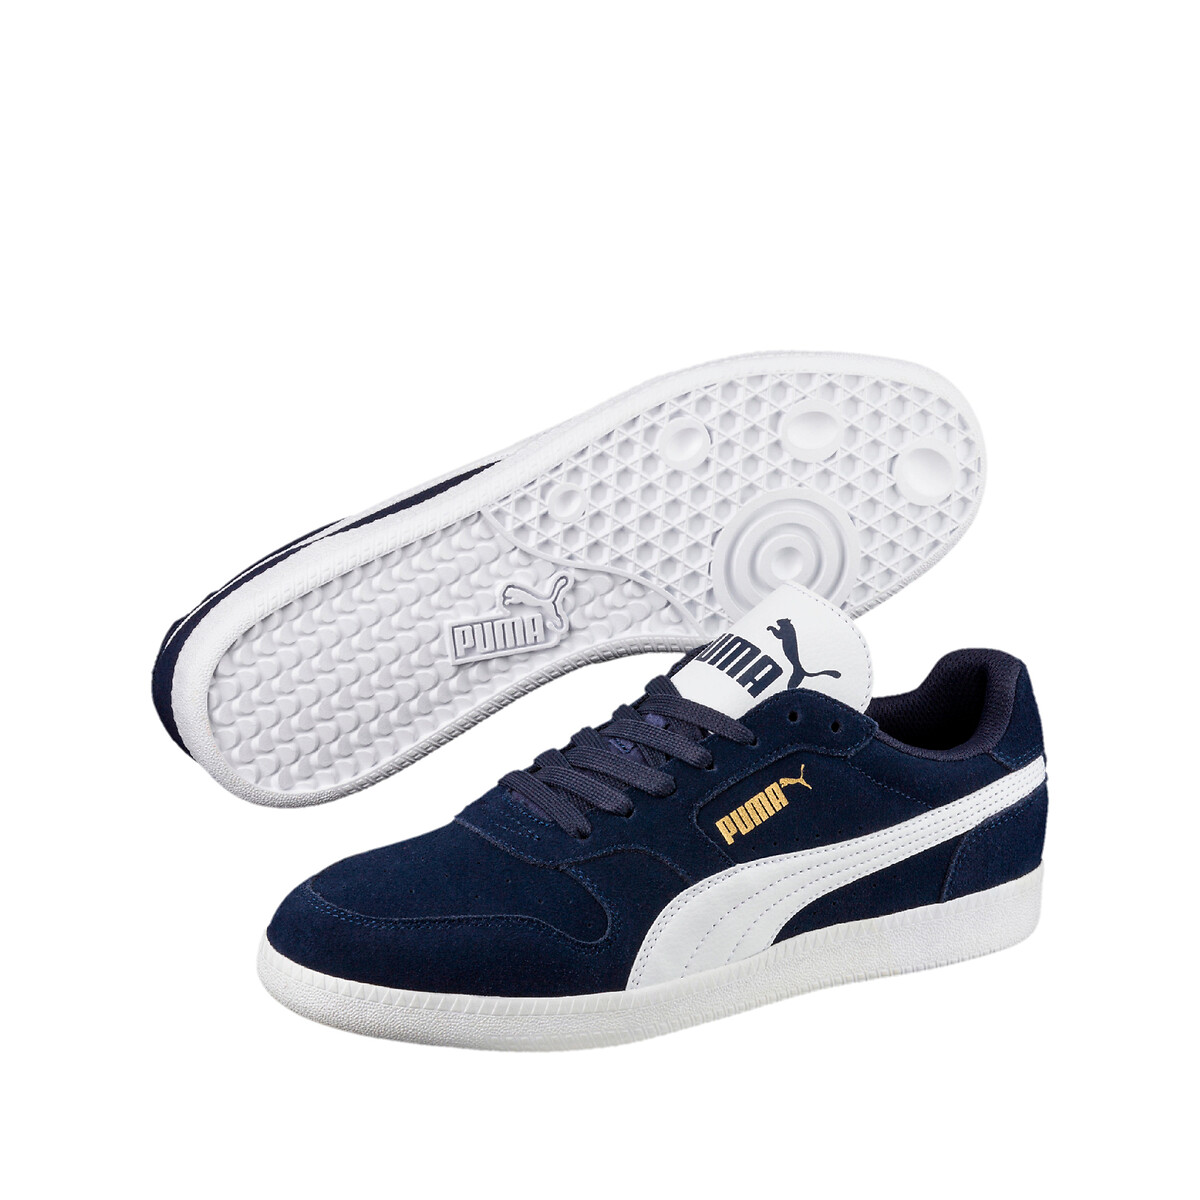 Icra trainer sd suede trainers navy 